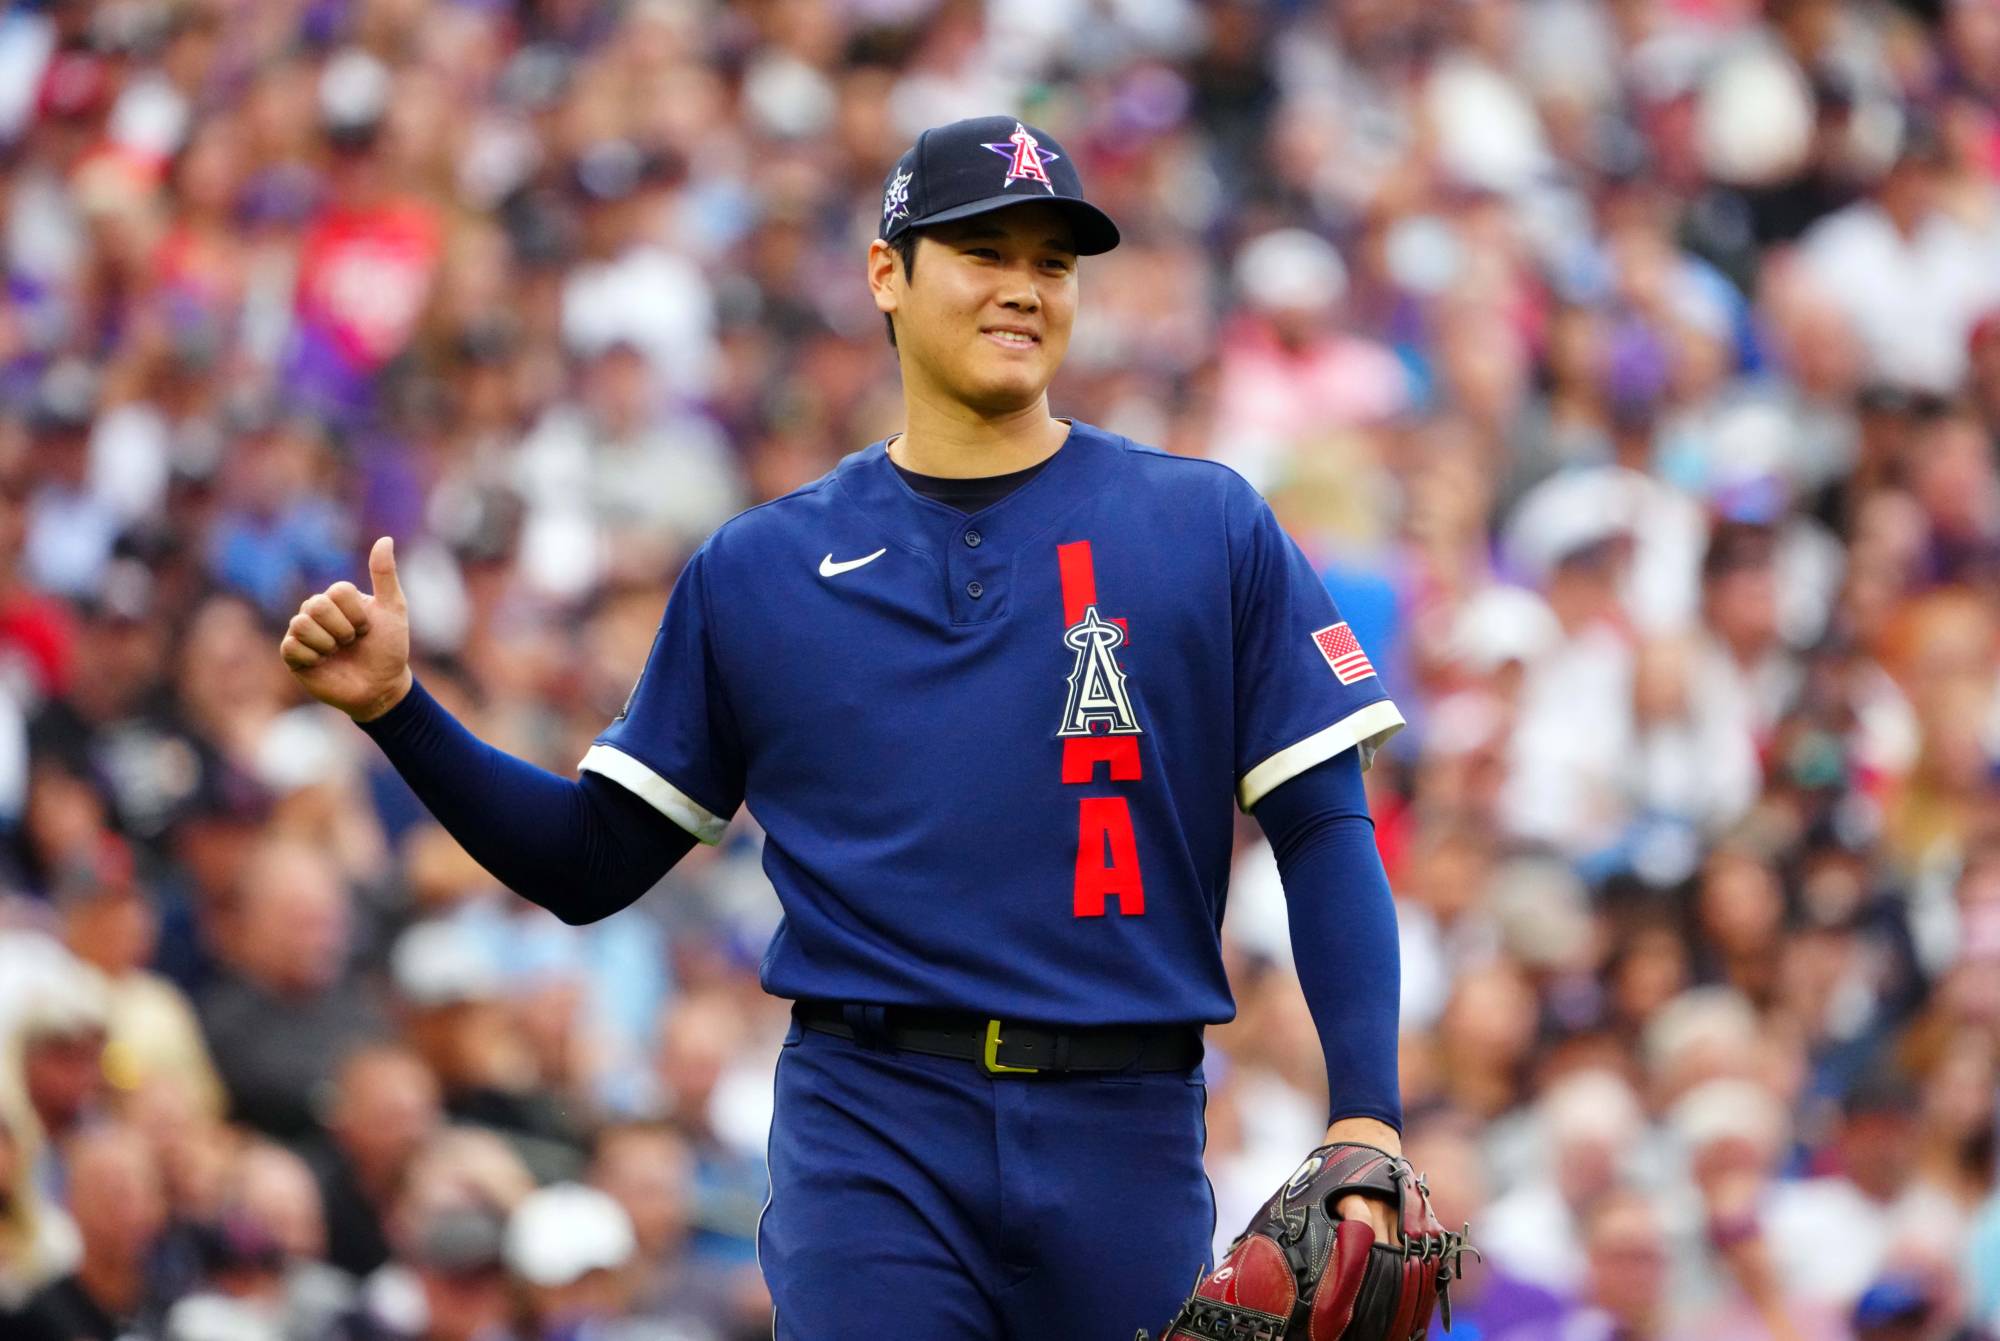 MLB All-Star Game 2021: MLB releases All-Star Game uniforms